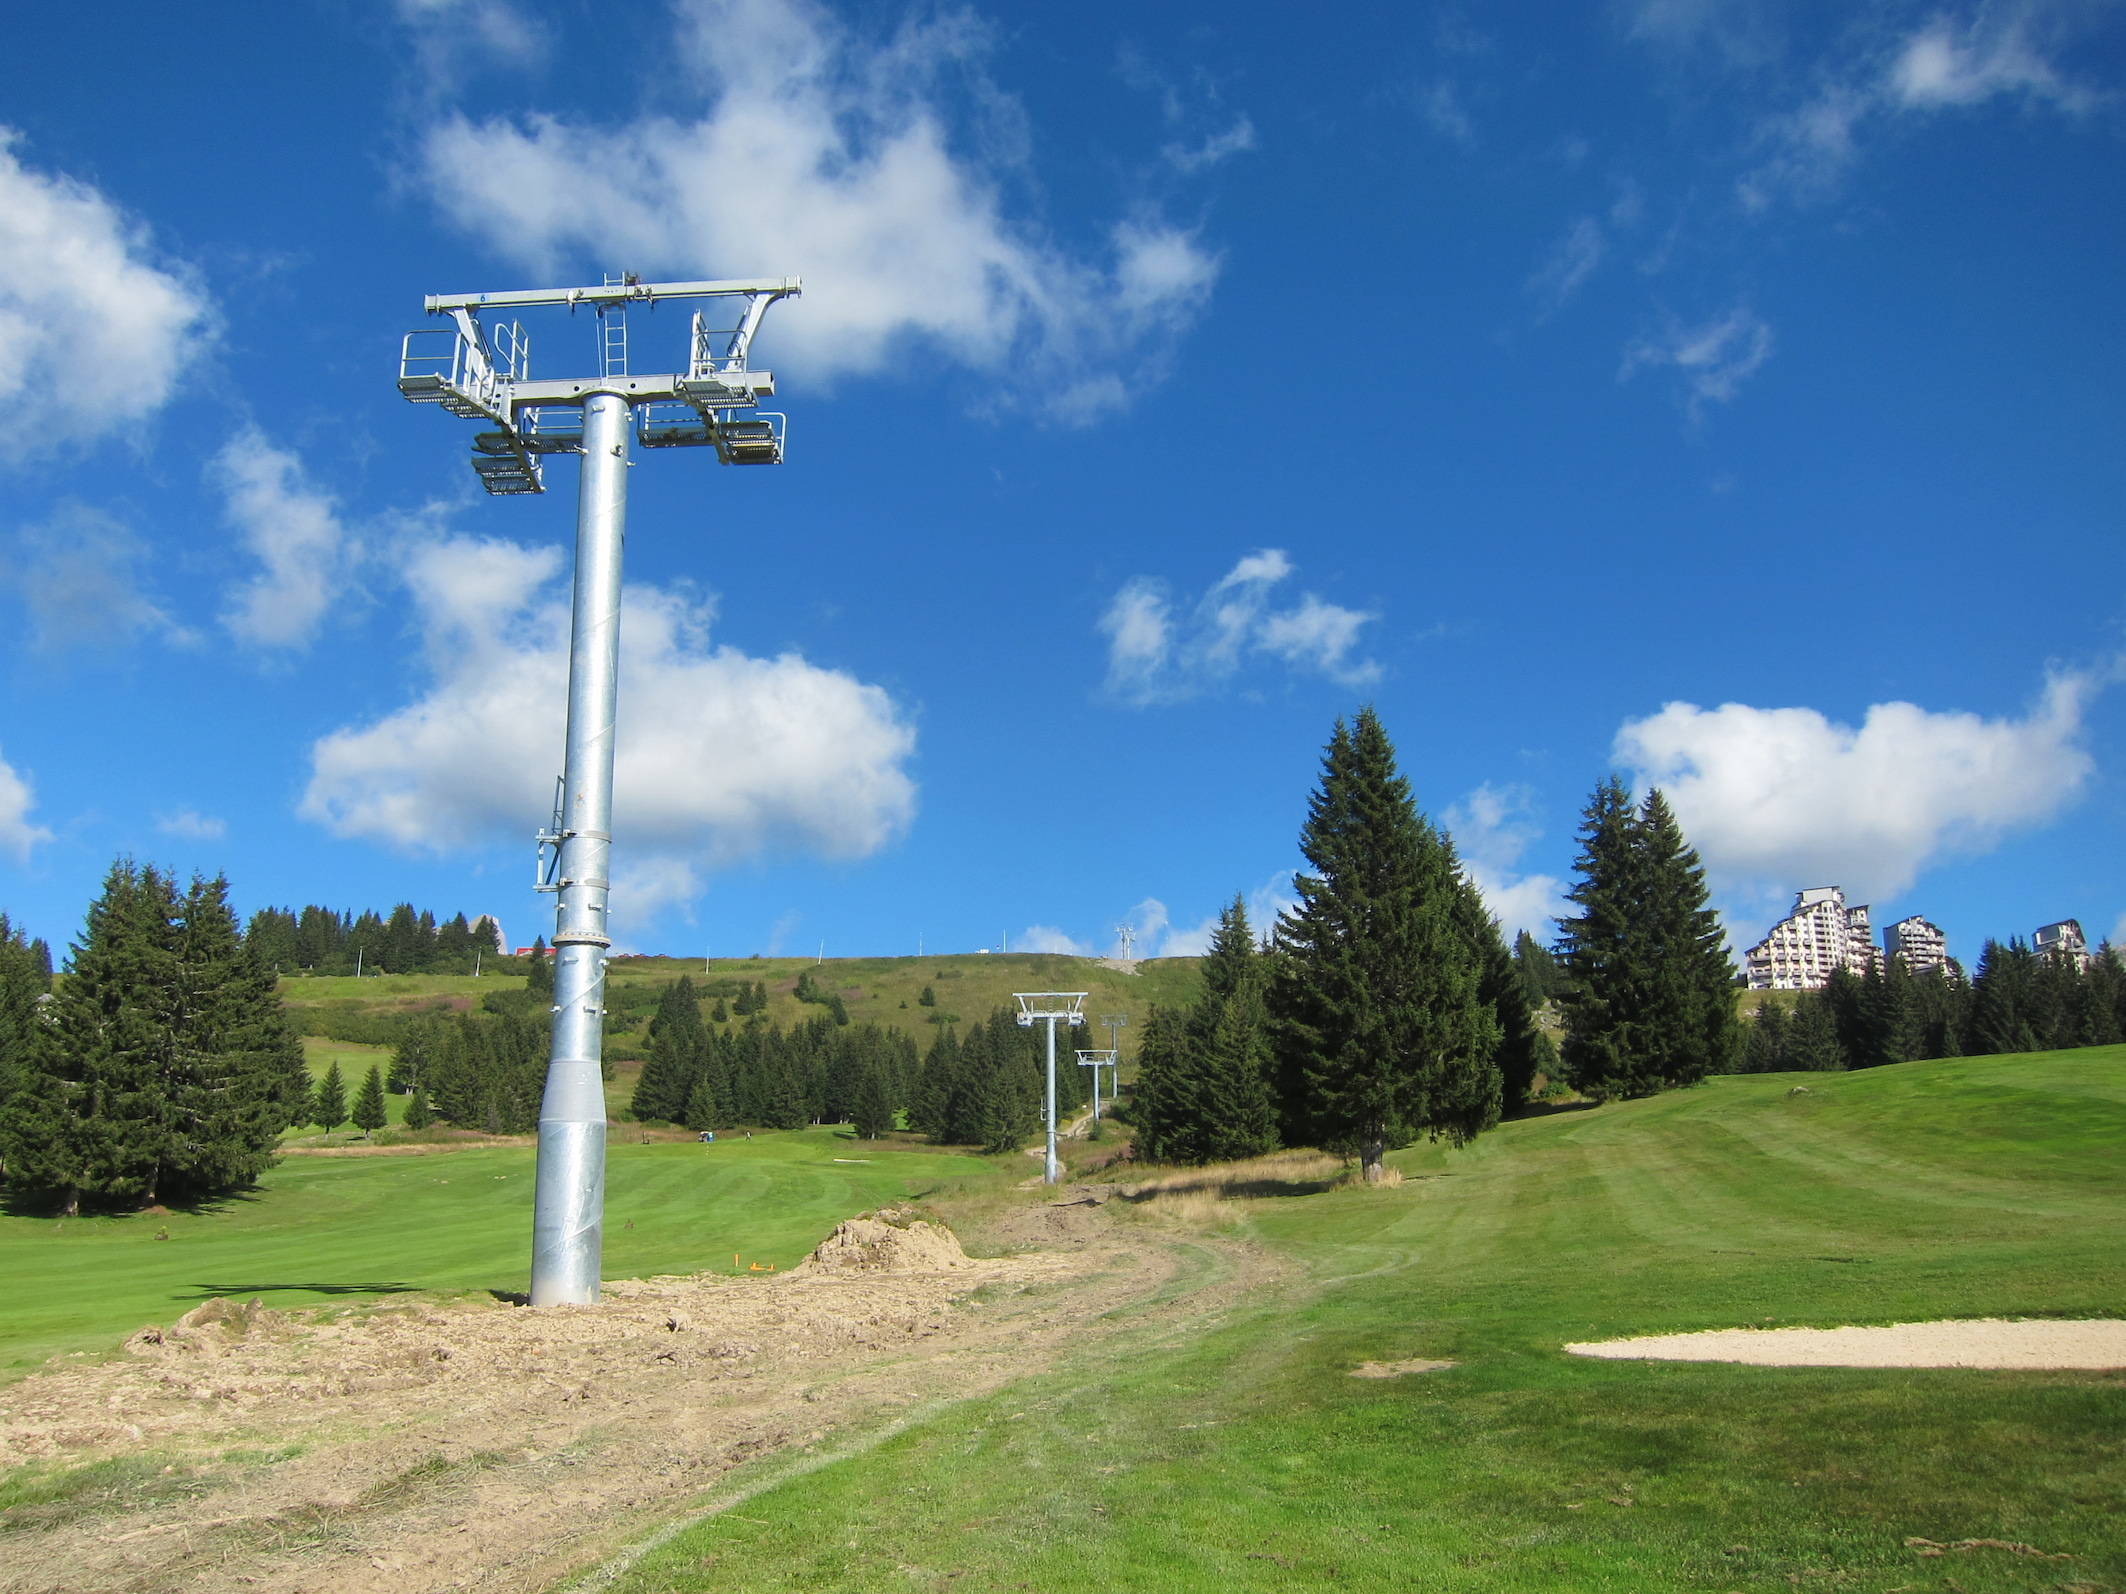 The new Proclou chairflit over the Avoriaz golf course